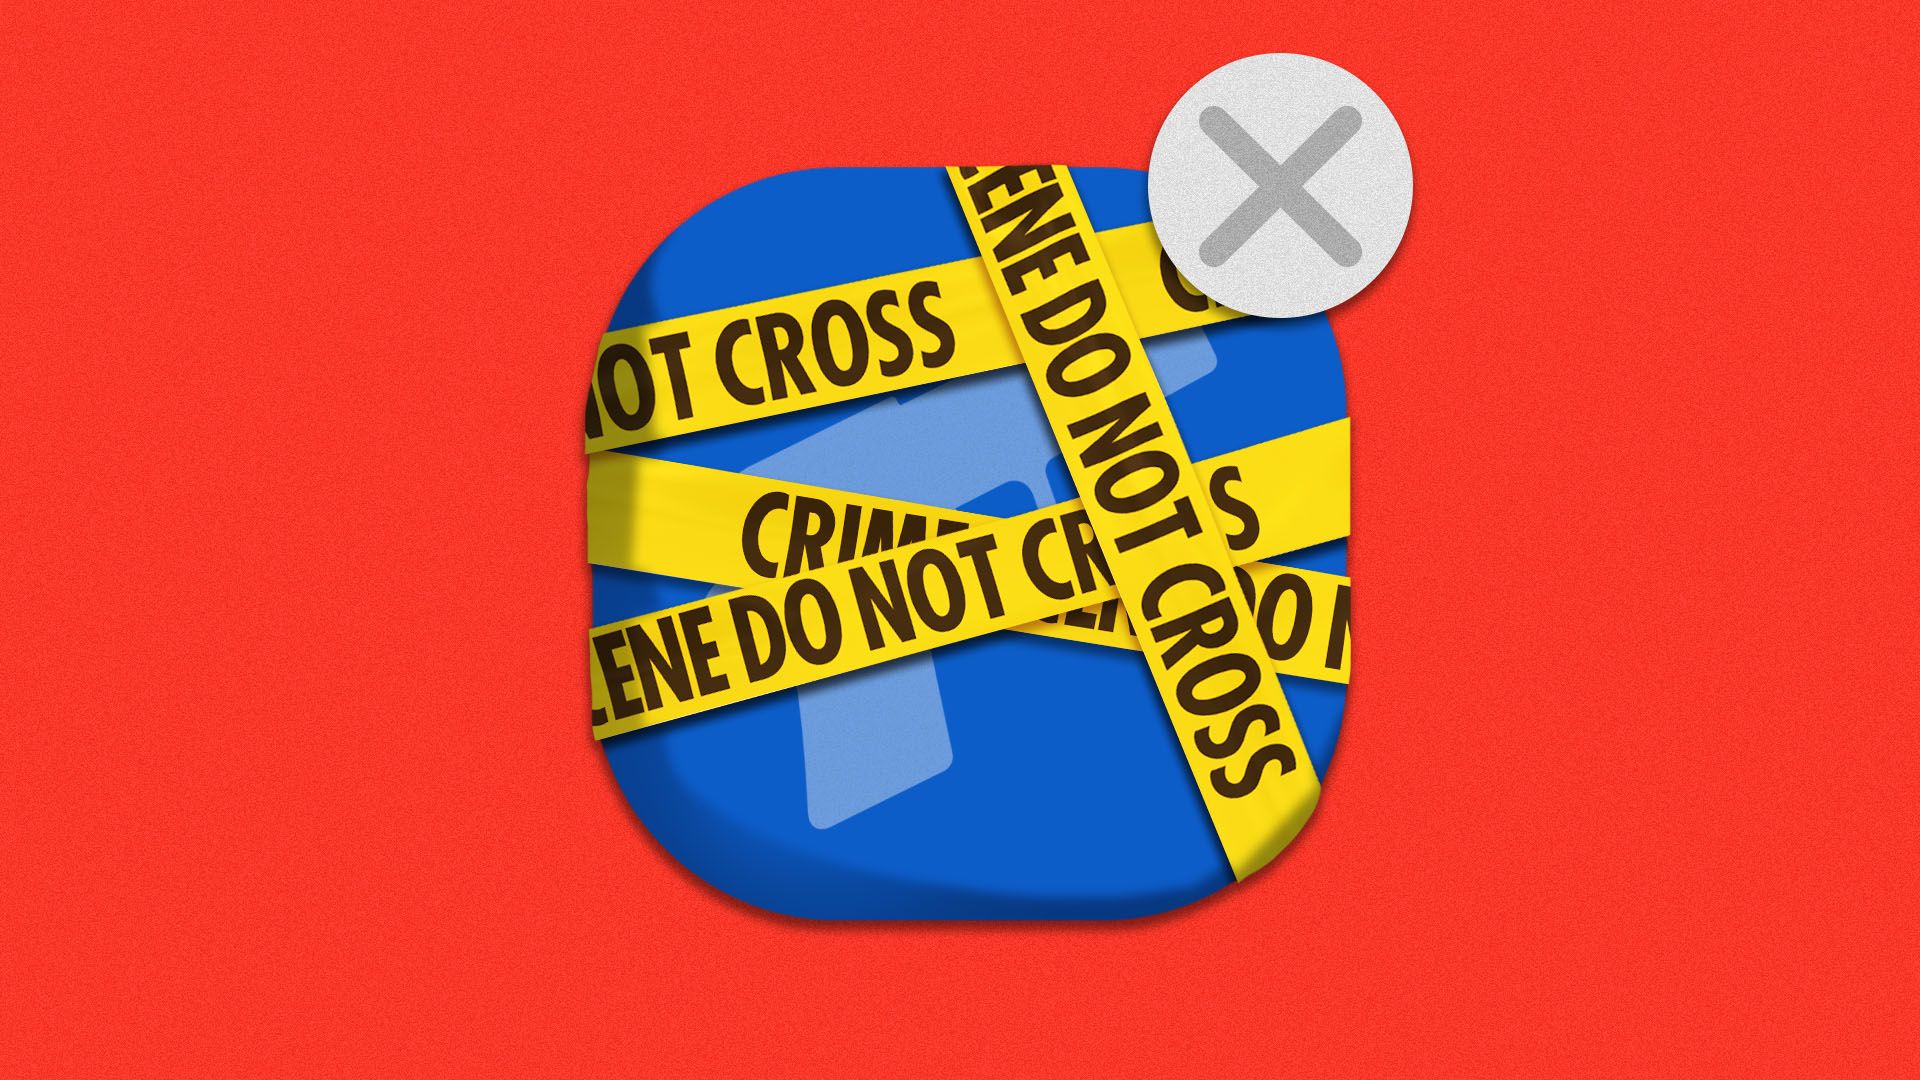 Illustration of an app icon with a gun and a delete button covered in police crime scene tape